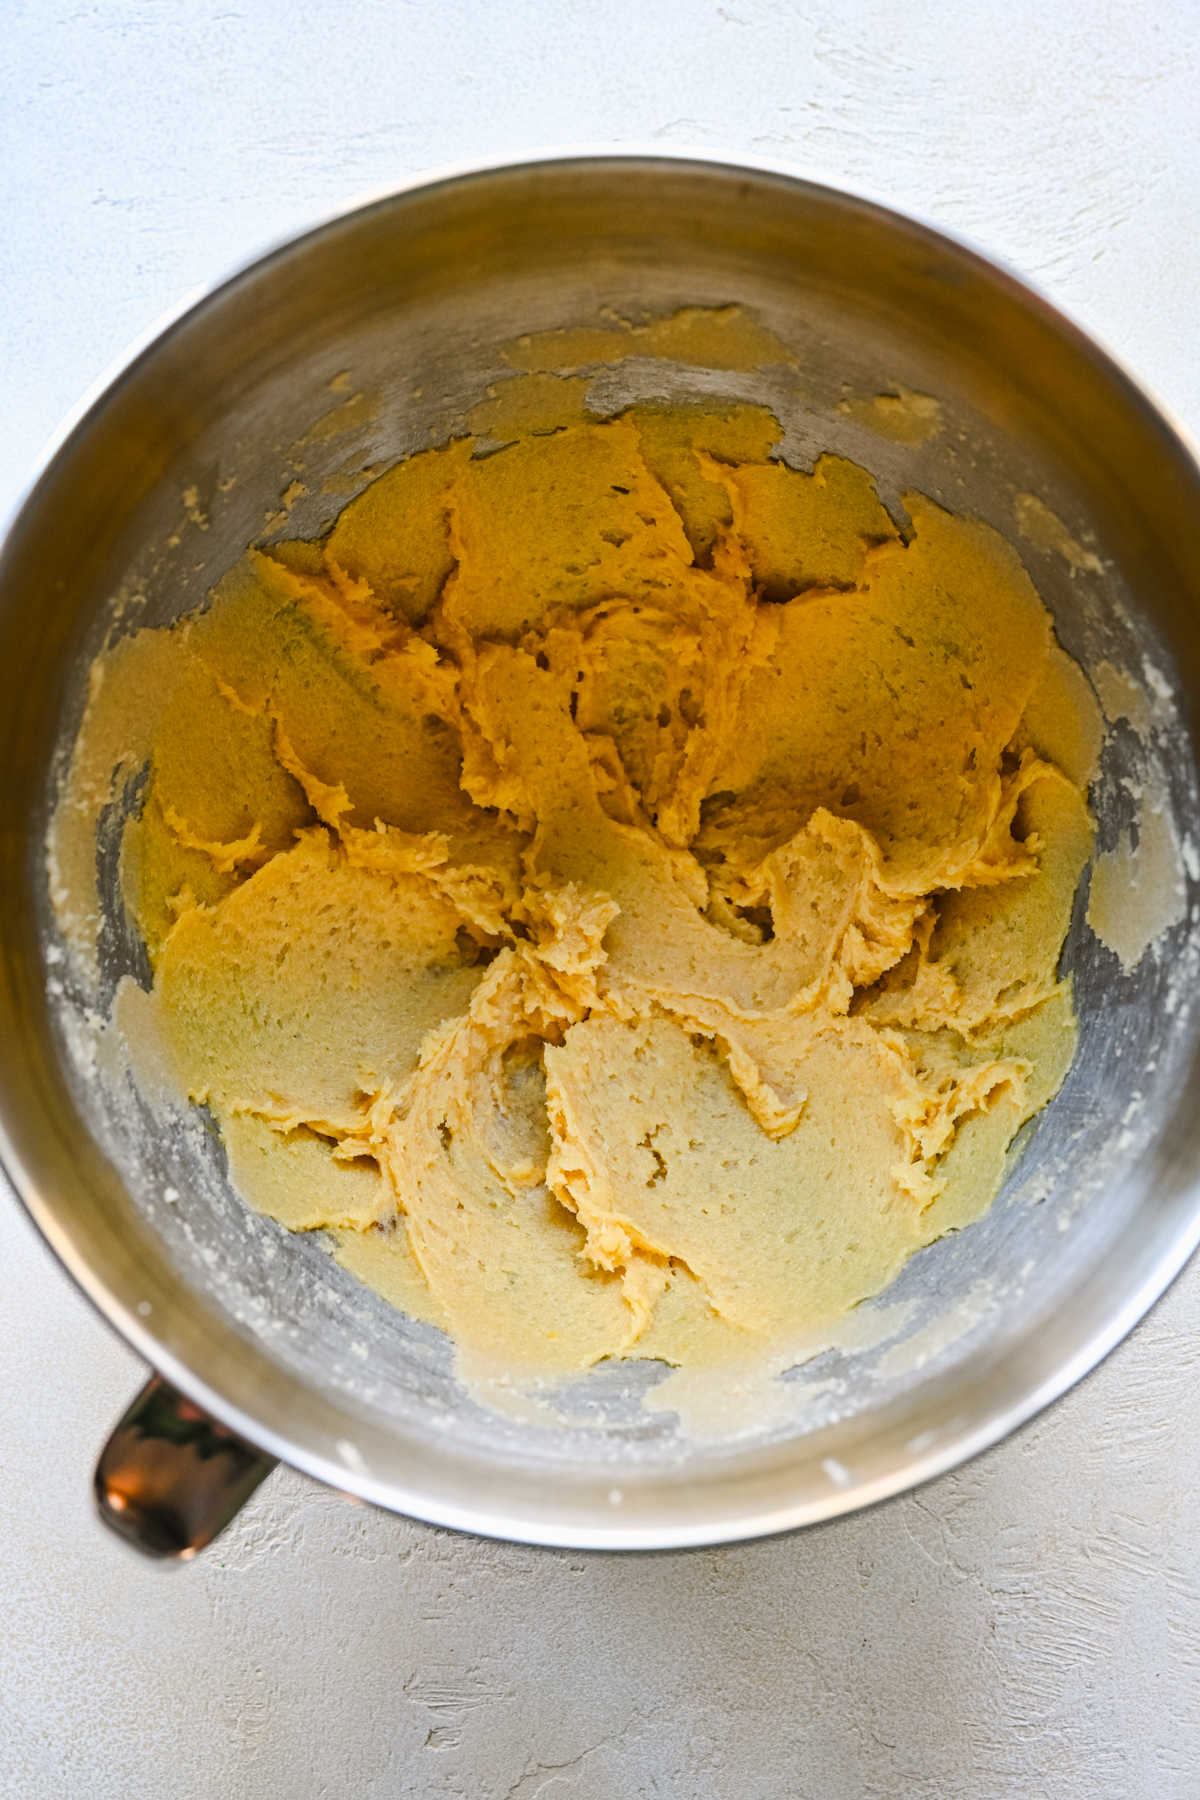 Egg yolks mixed into creamed butter mixture.